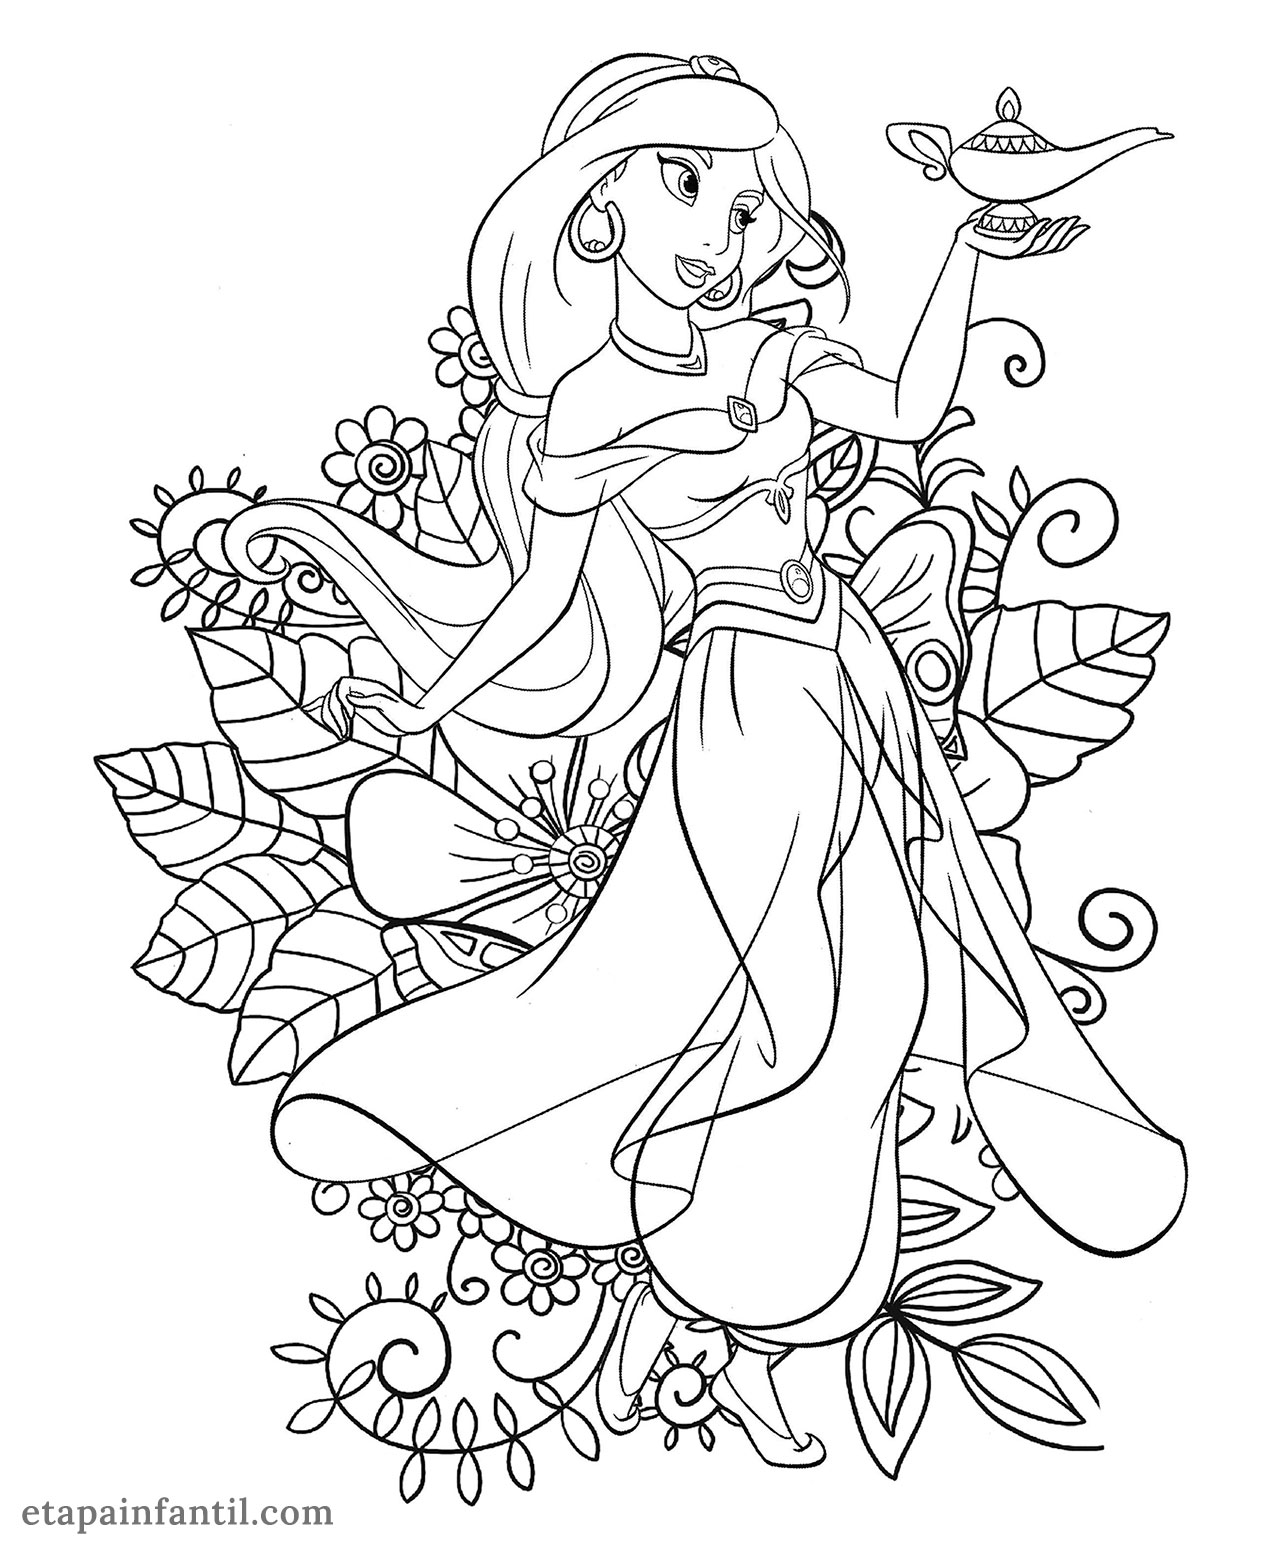 Exciting jasmine coloring pages